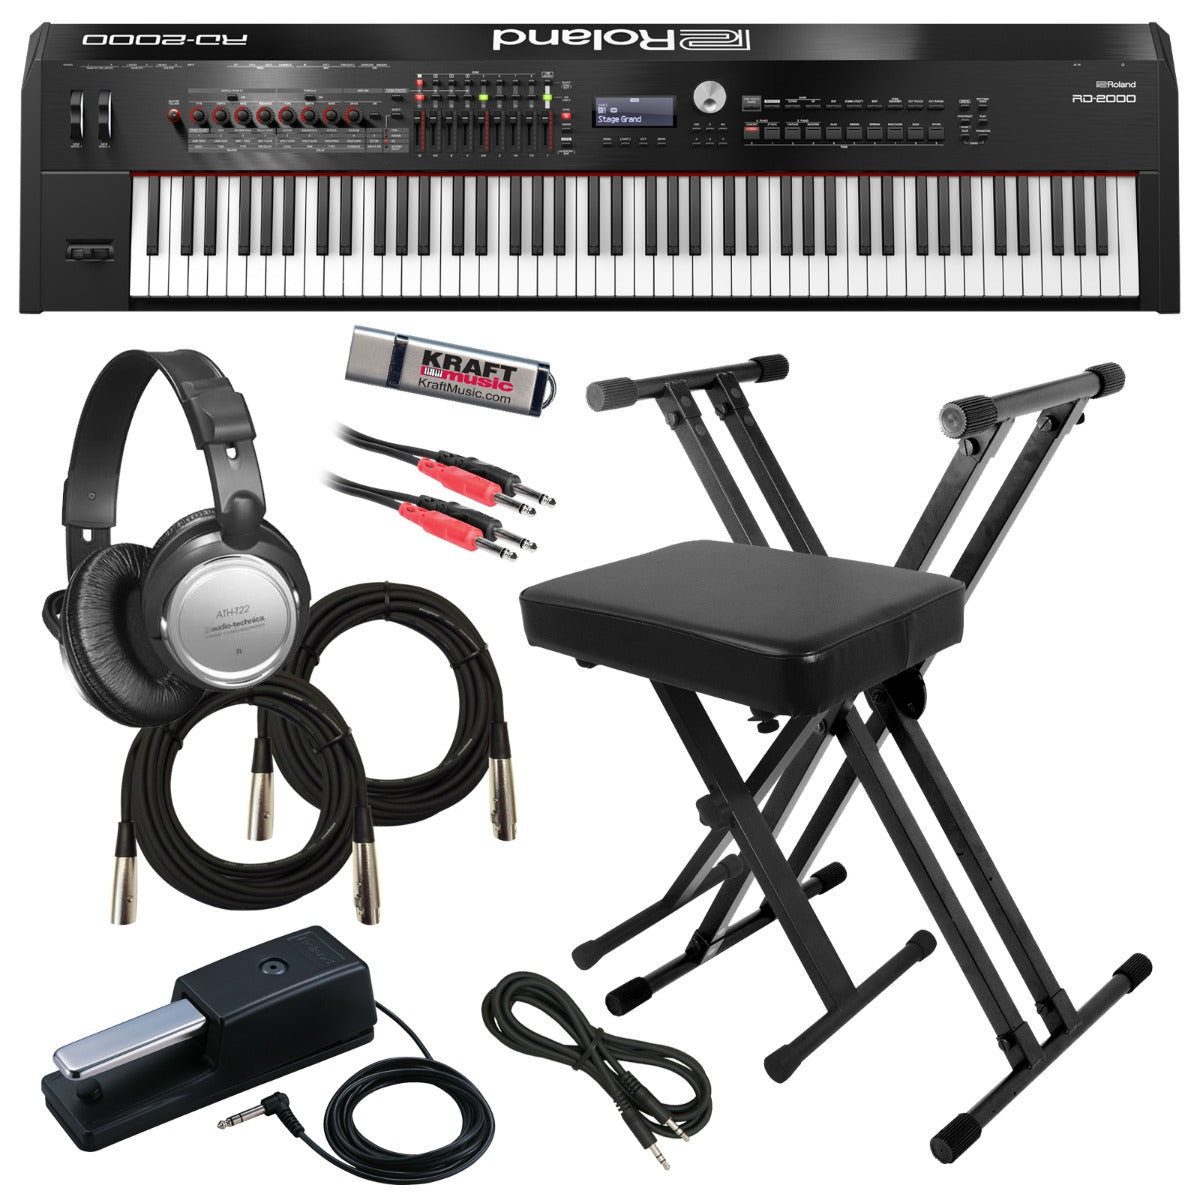 Collage image of the Roland RD-2000 Stage Piano KEY ESSENTIALS BUNDLE